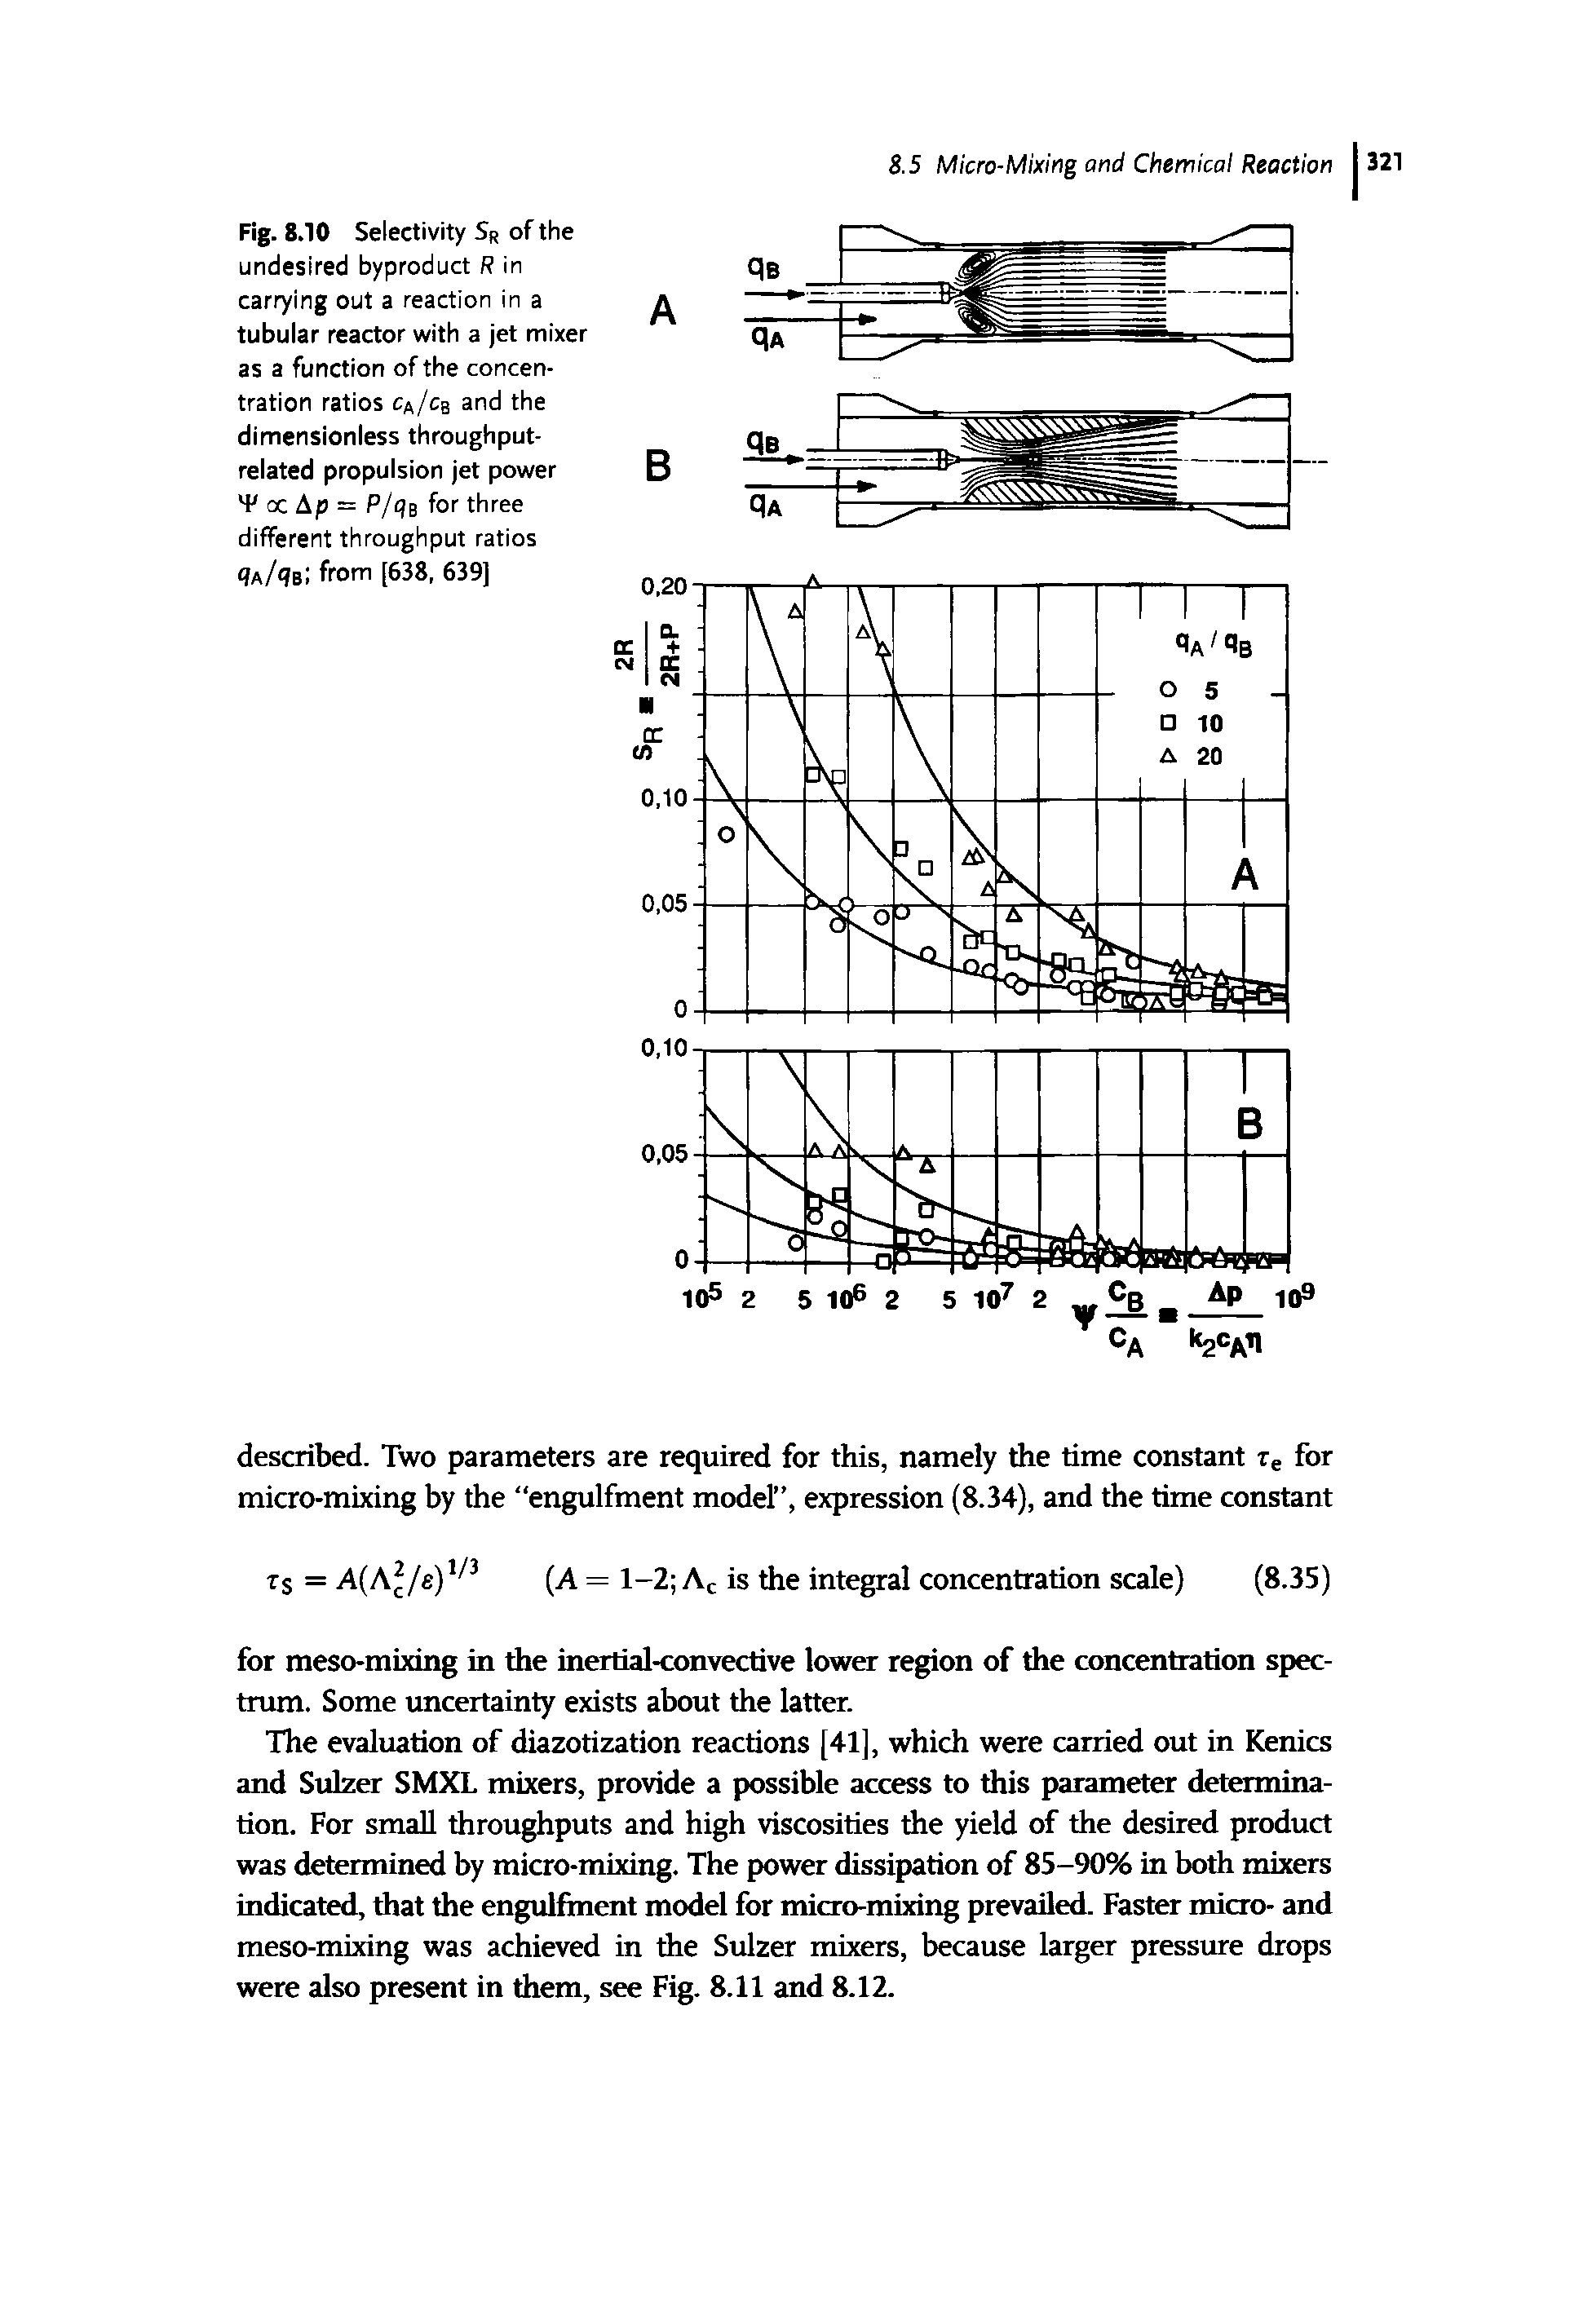 Fig. 8.10 Selectivity Sr of the undesired byproduct R in carrying out a reaction in a tubular reactor with a jet mixer as a function of the concentration ratios ca/cs and the dimensionless throughput-related propulsion jet power F oc Ap = P/rb for three different throughput ratios < a/< b from [638, 639]...